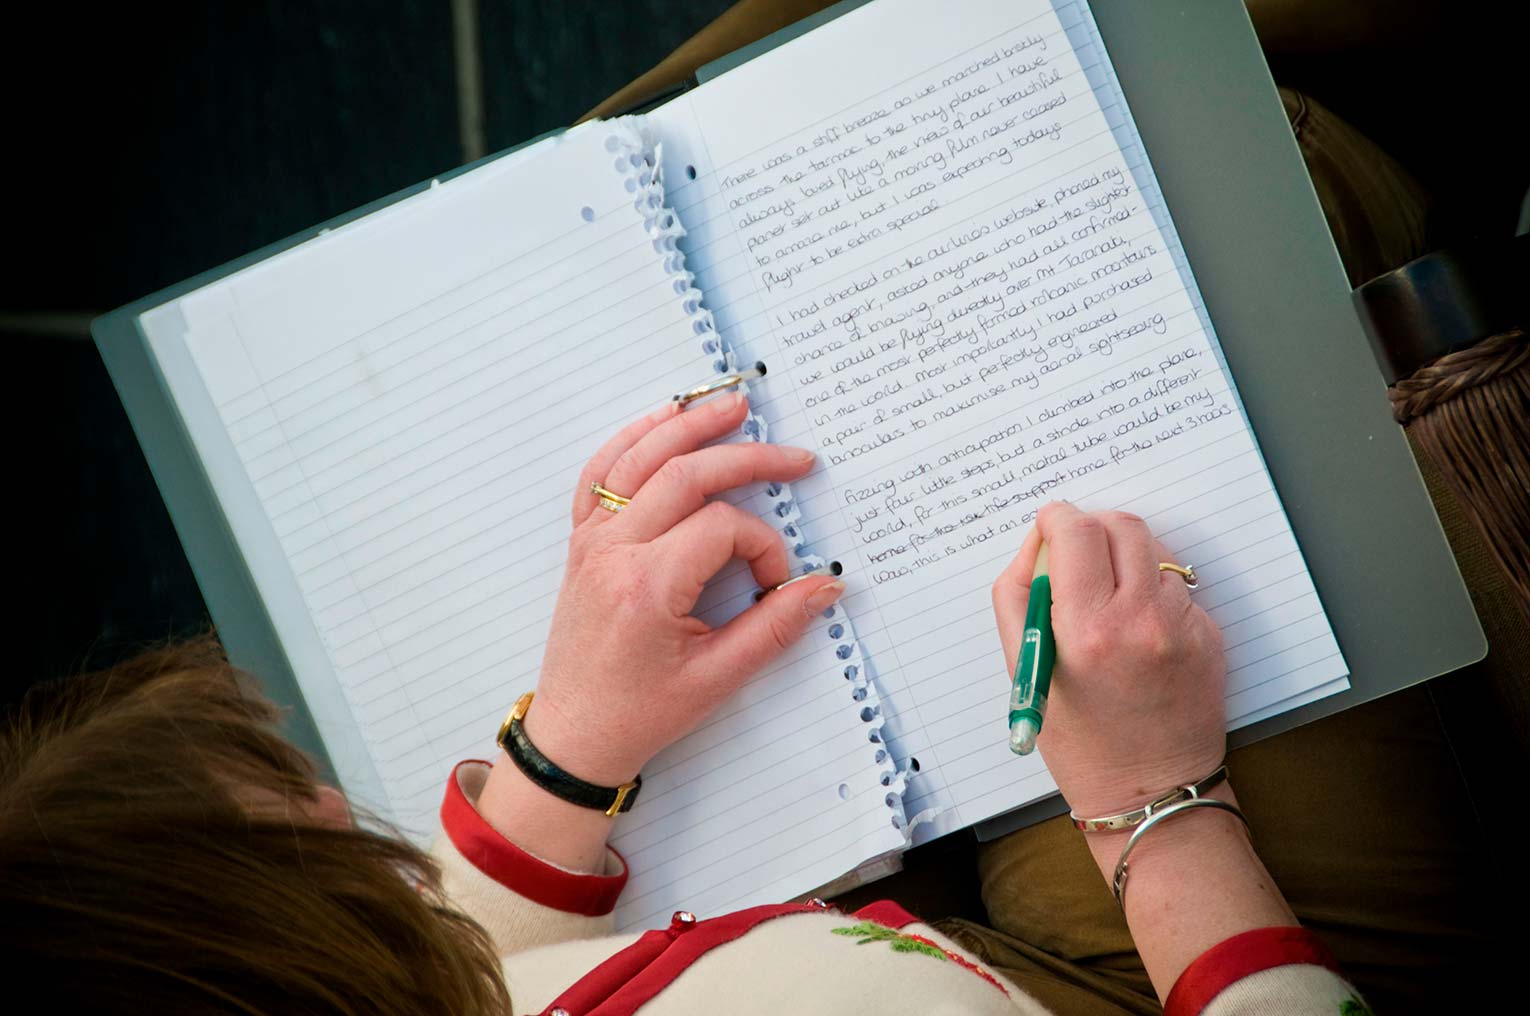 Is a creative writing course a golden ticket to the world of publishing?